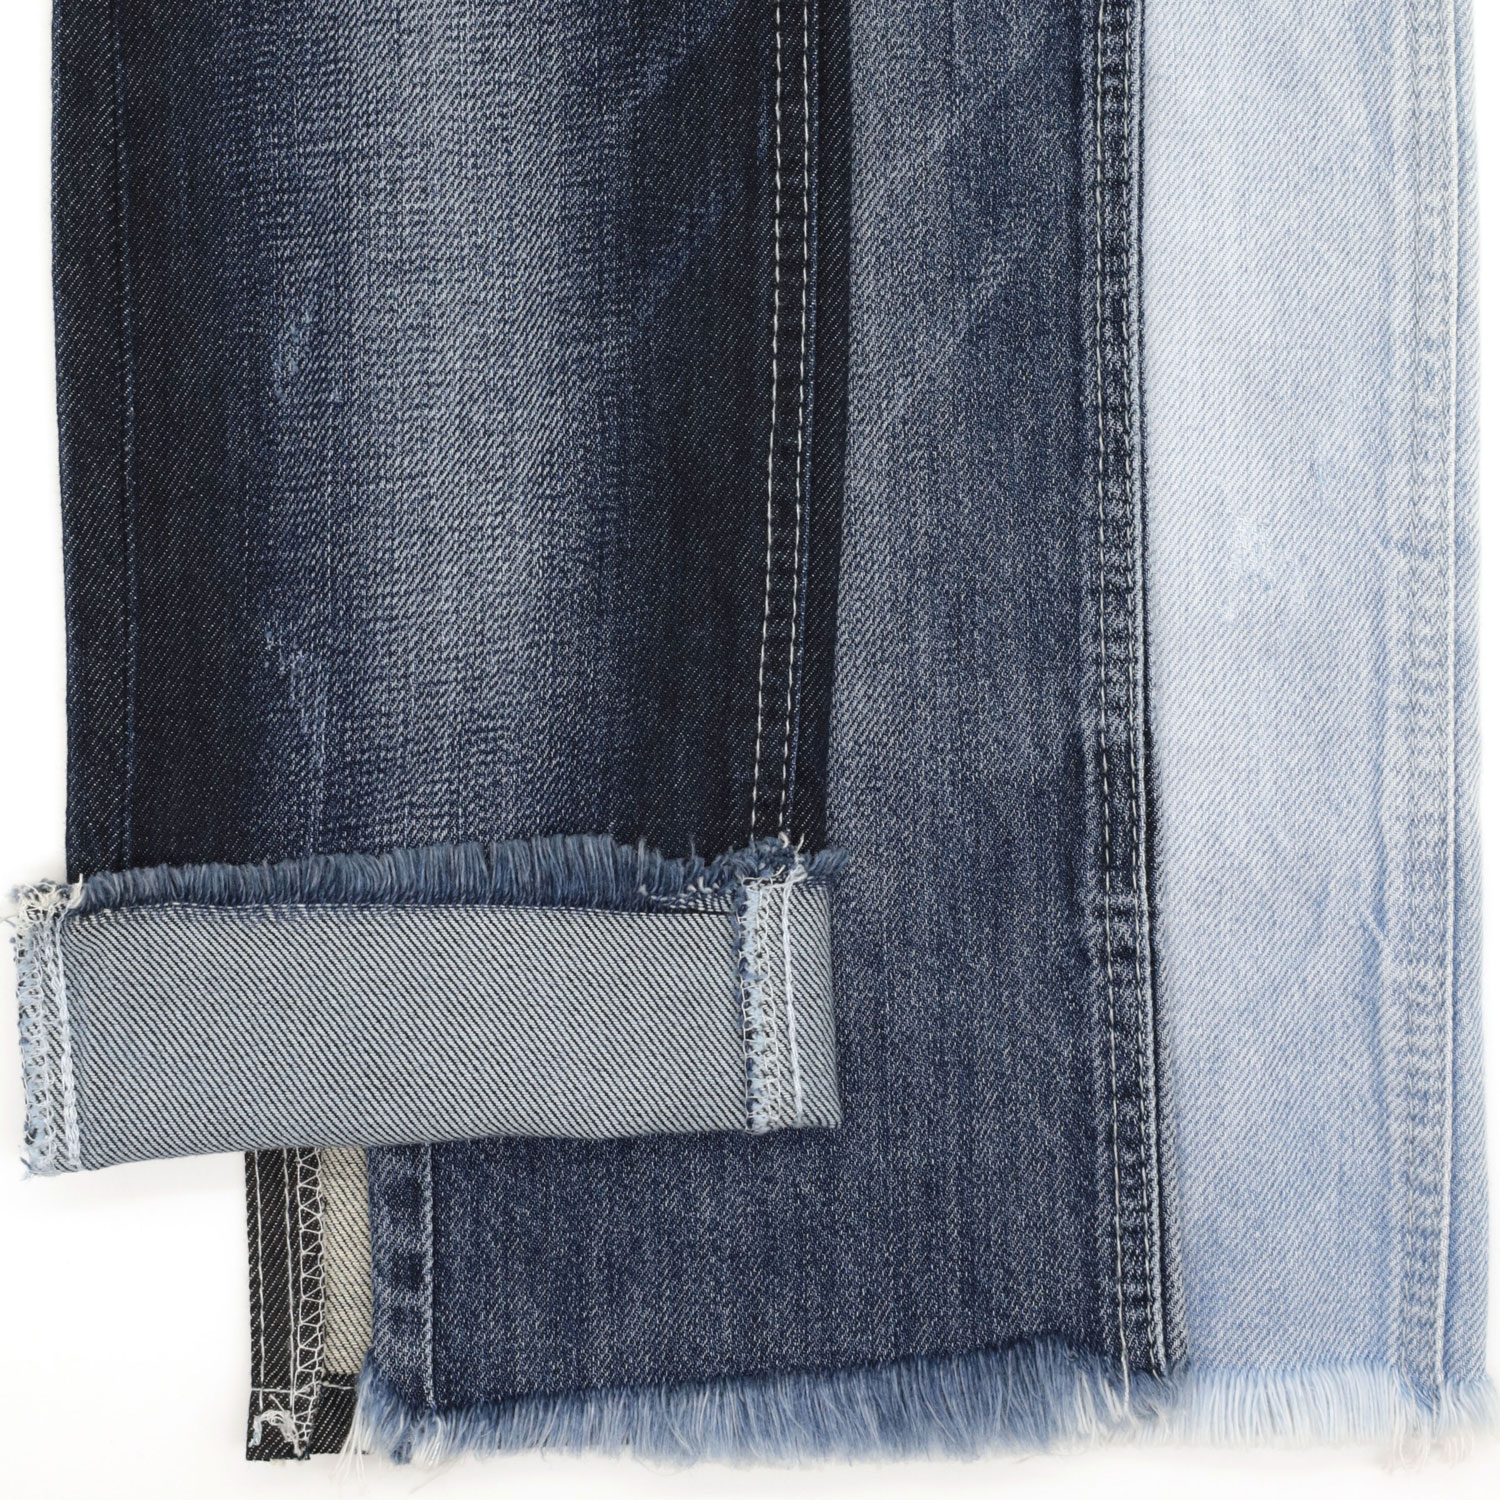 What Are the Top Factors Affecting of China Denim Fabric? 2